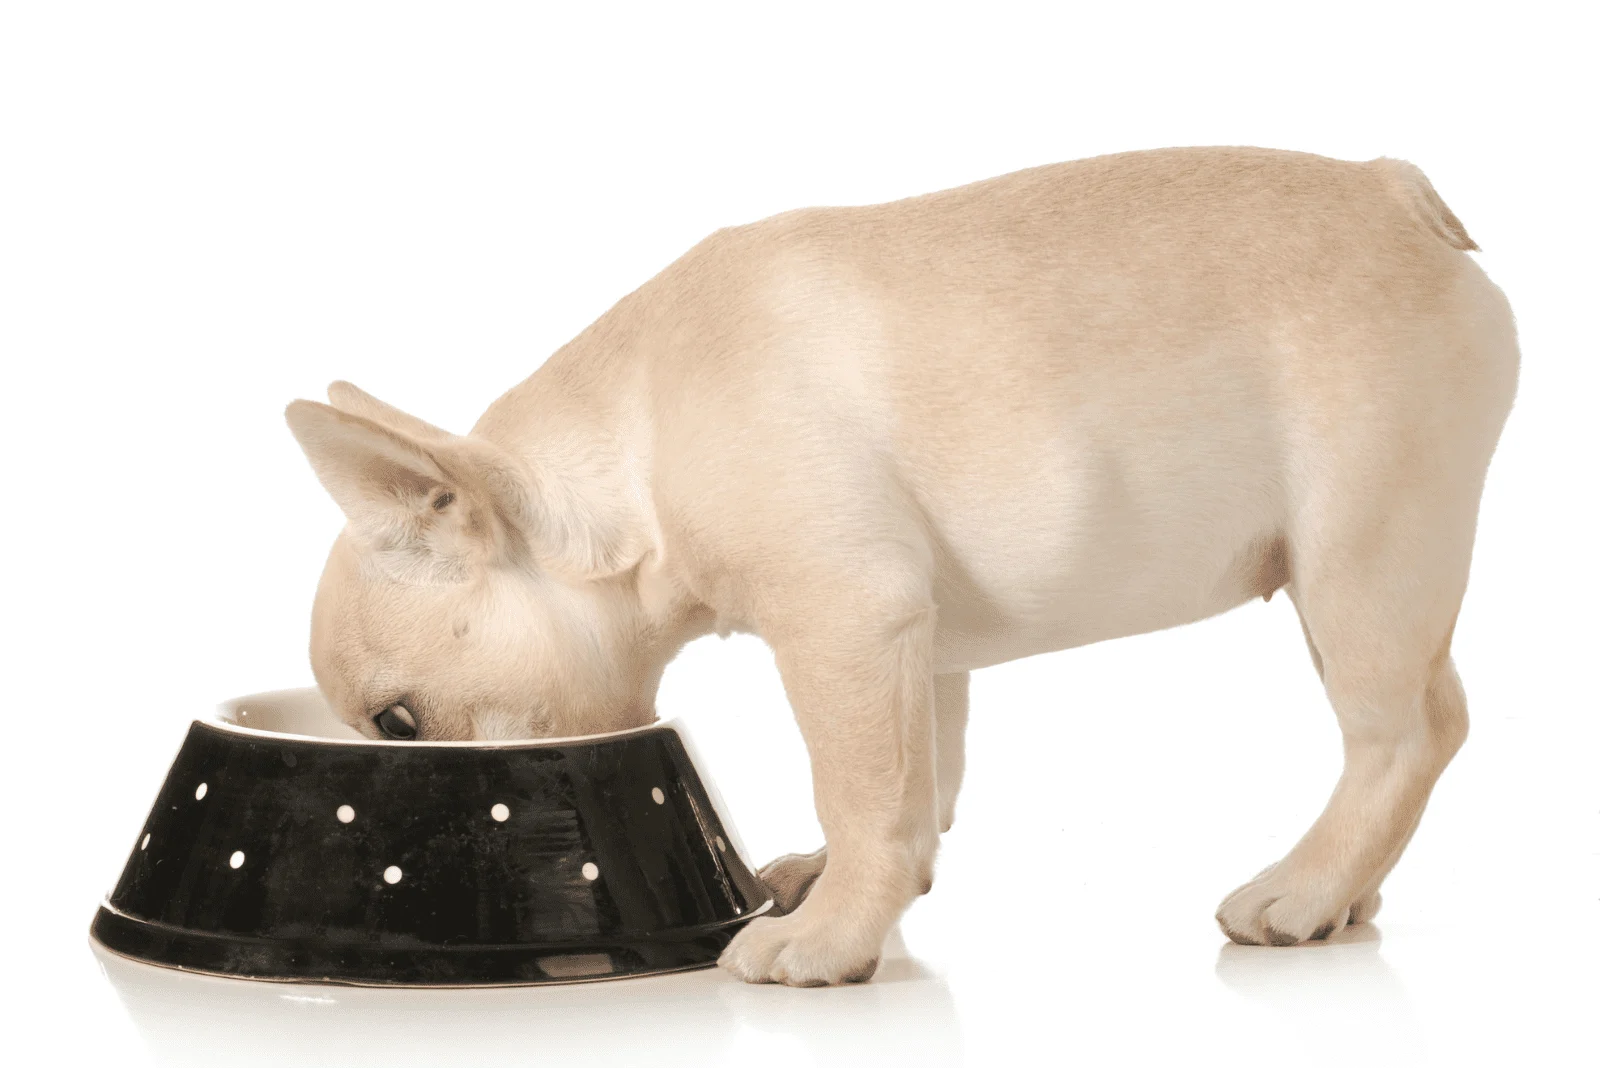 French Bulldog is eating